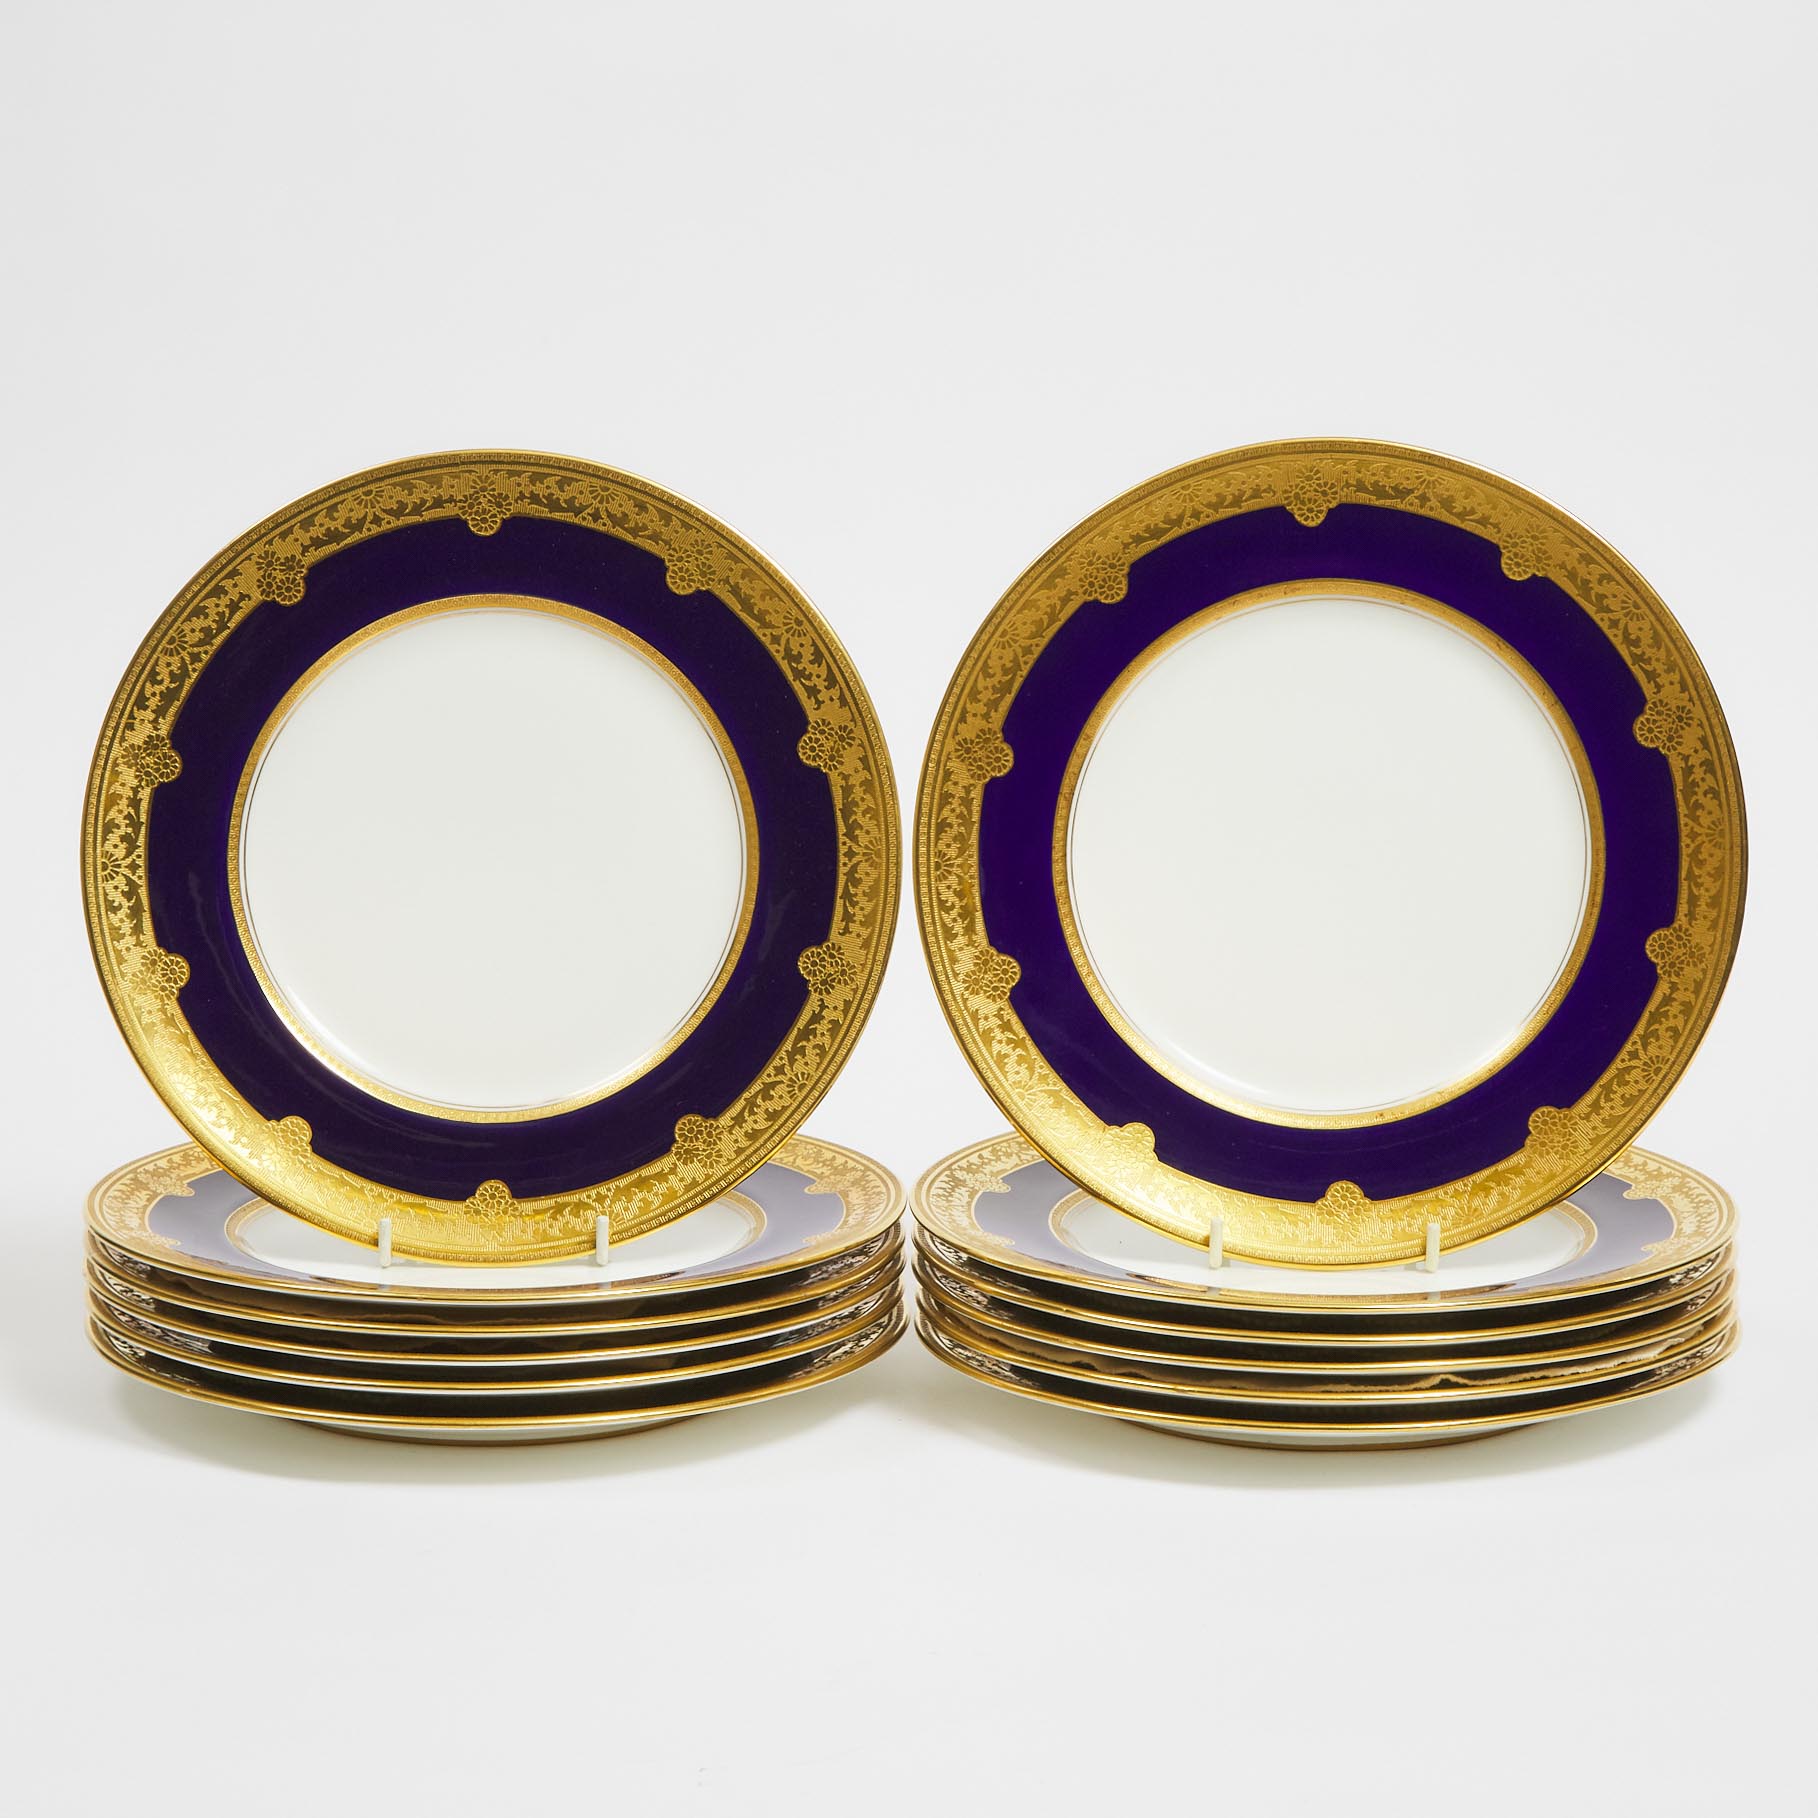 Set of Twelve Royal Doulton Blue and Gilt Bordered Service Plates, 1920s